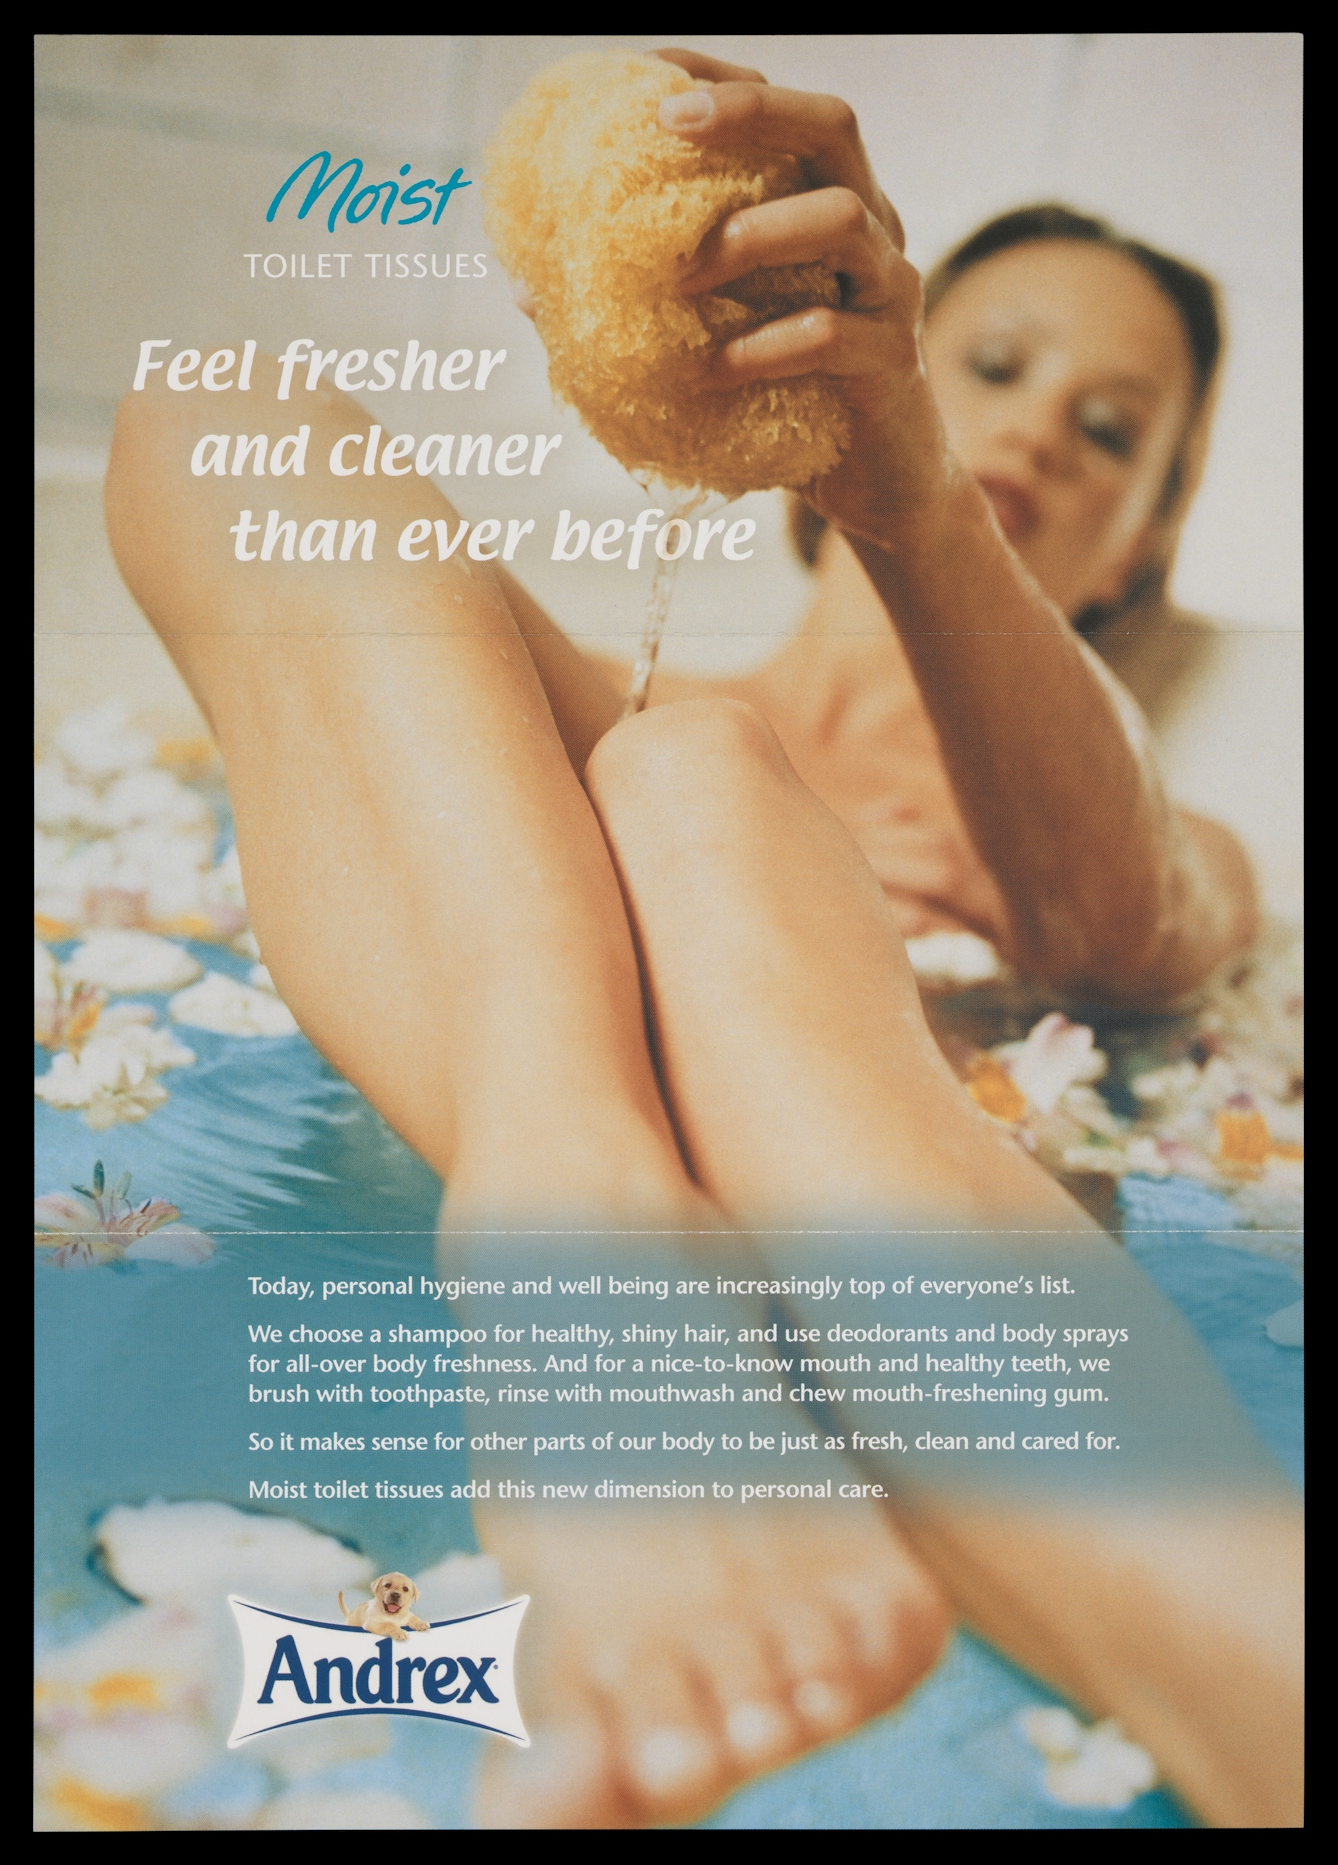 Photograph of the cover of a promotional leaflet for Andrex toilet tissue showing a woman in the bath squeezing water from a sponge over her legs, with the title, "Feel fresh and cleaner than ever before".